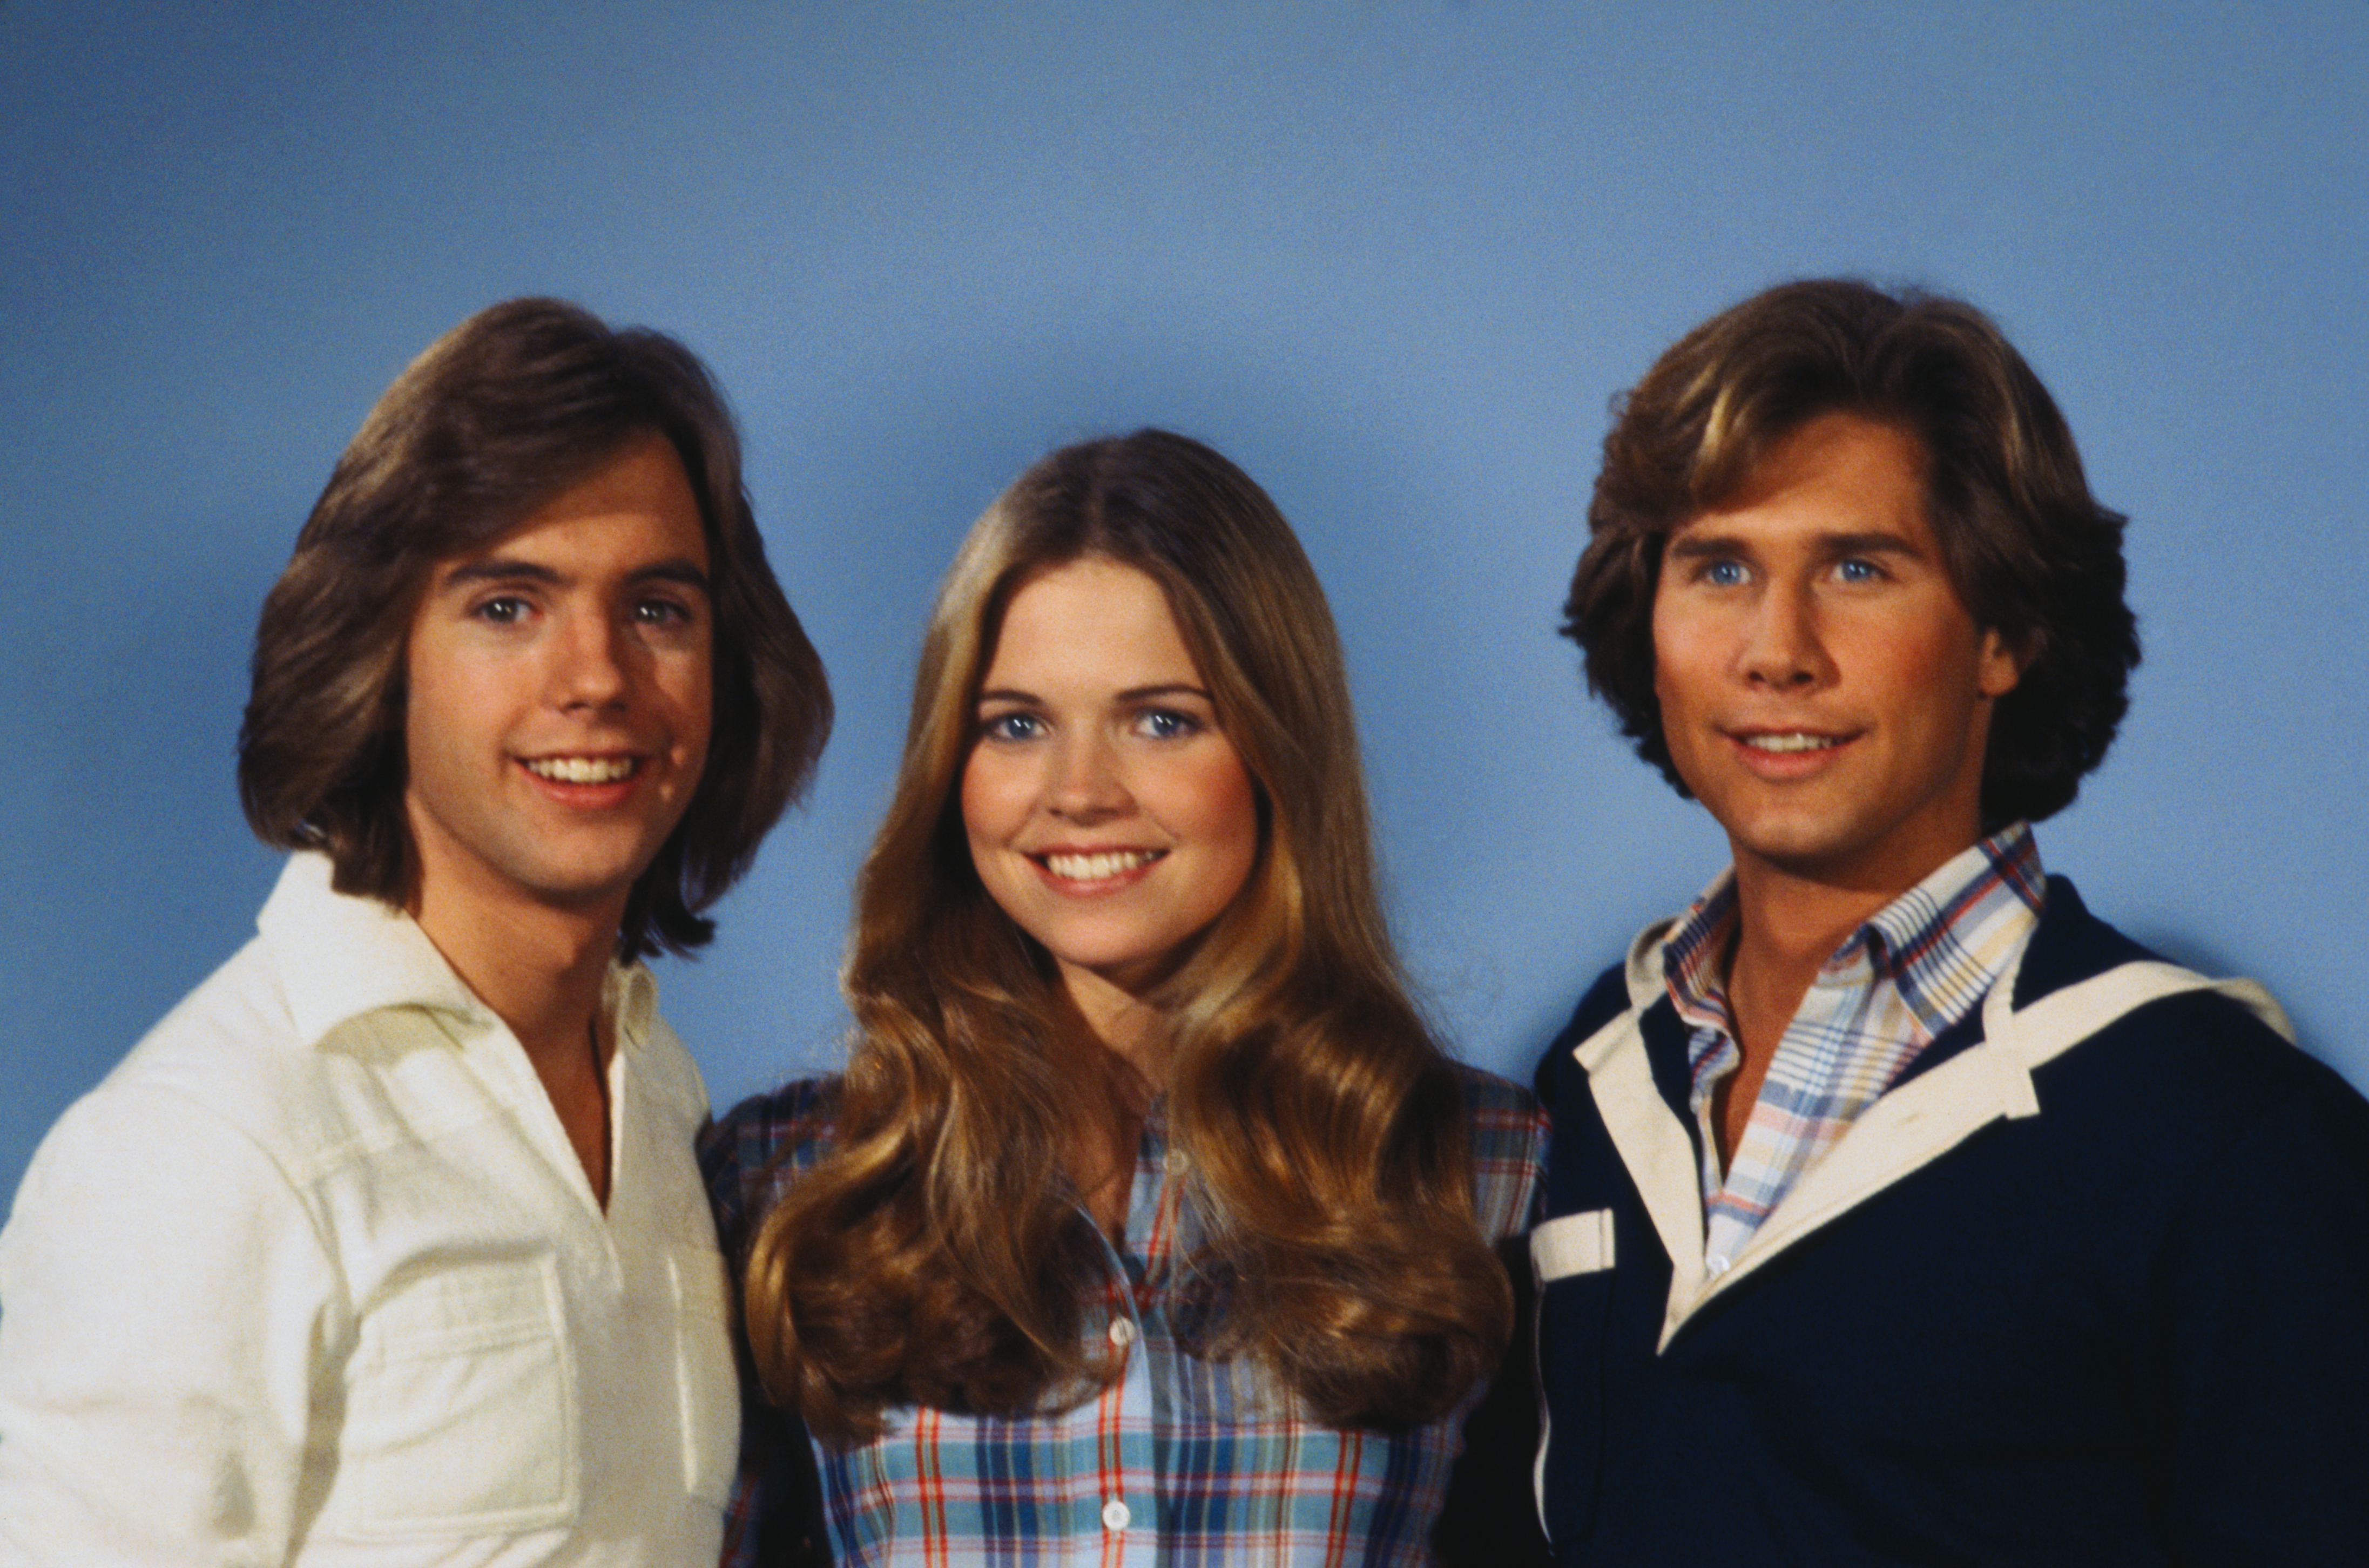 Janet Louise Johnson, 18, (C) poses with Shaun Cassidy (L) and Parker Stevenson at Universal Studios circa 1978. | Source: Getty Images